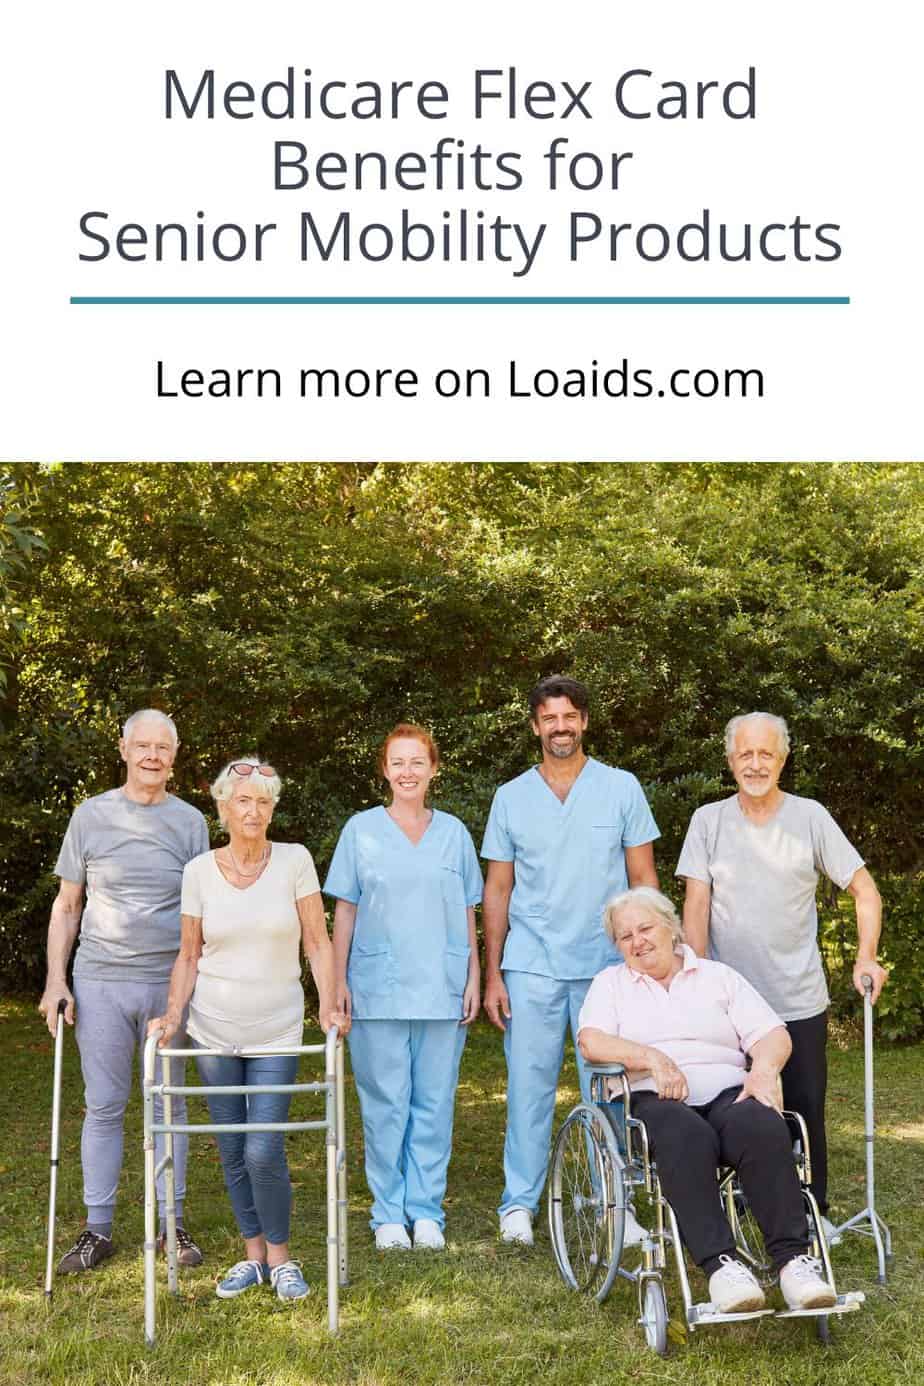 senior citizens with different mobility products